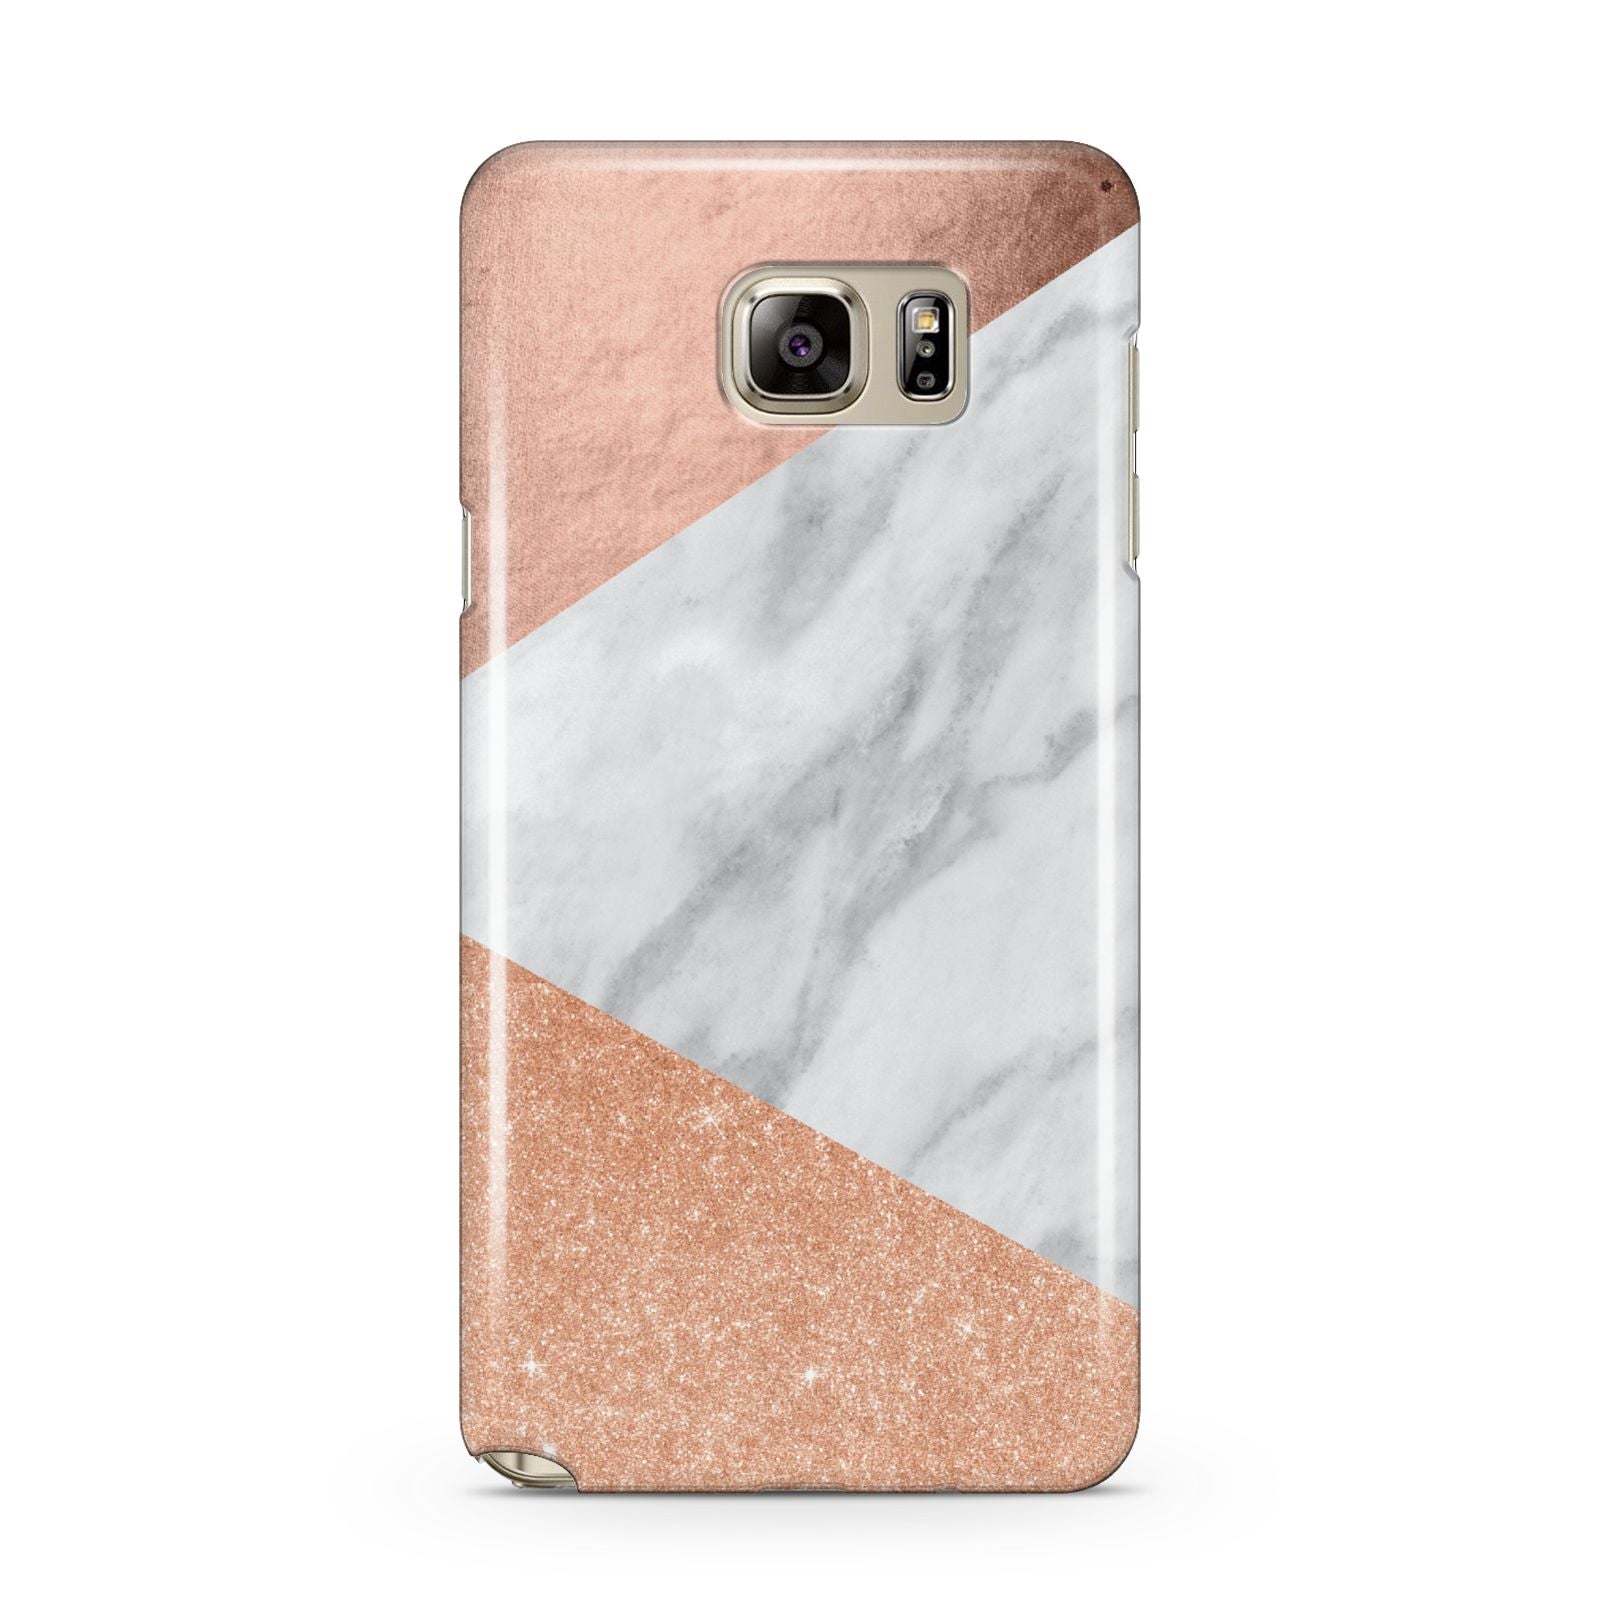 Marble Rose Gold Samsung Galaxy Note 5 Case